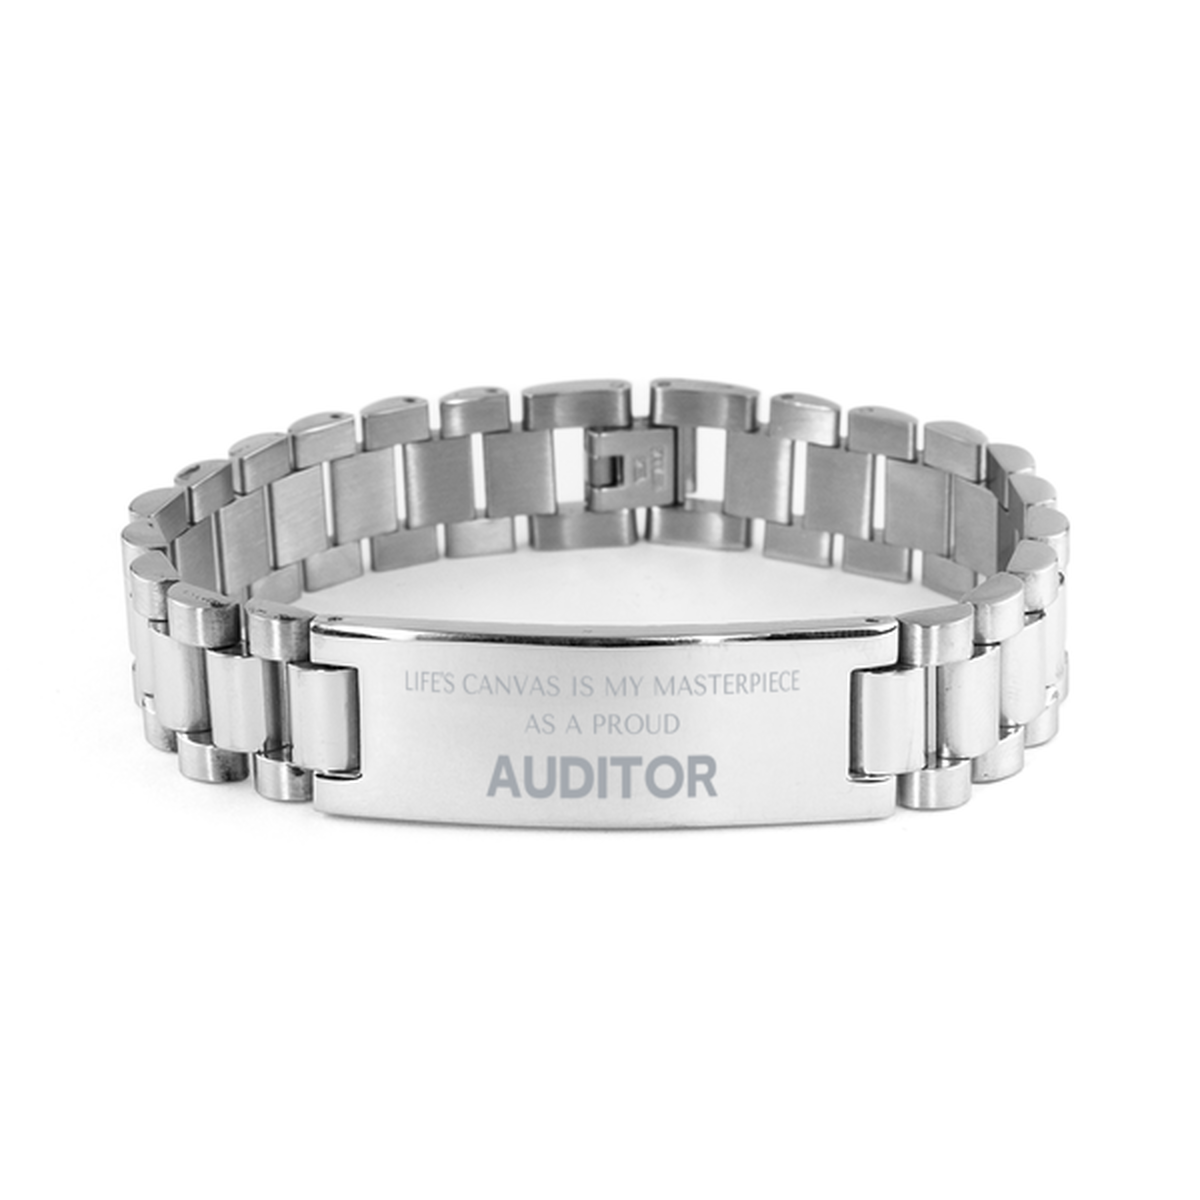 Proud Auditor Gifts, Life's canvas is my masterpiece, Epic Birthday Christmas Unique Ladder Stainless Steel Bracelet For Auditor, Coworkers, Men, Women, Friends